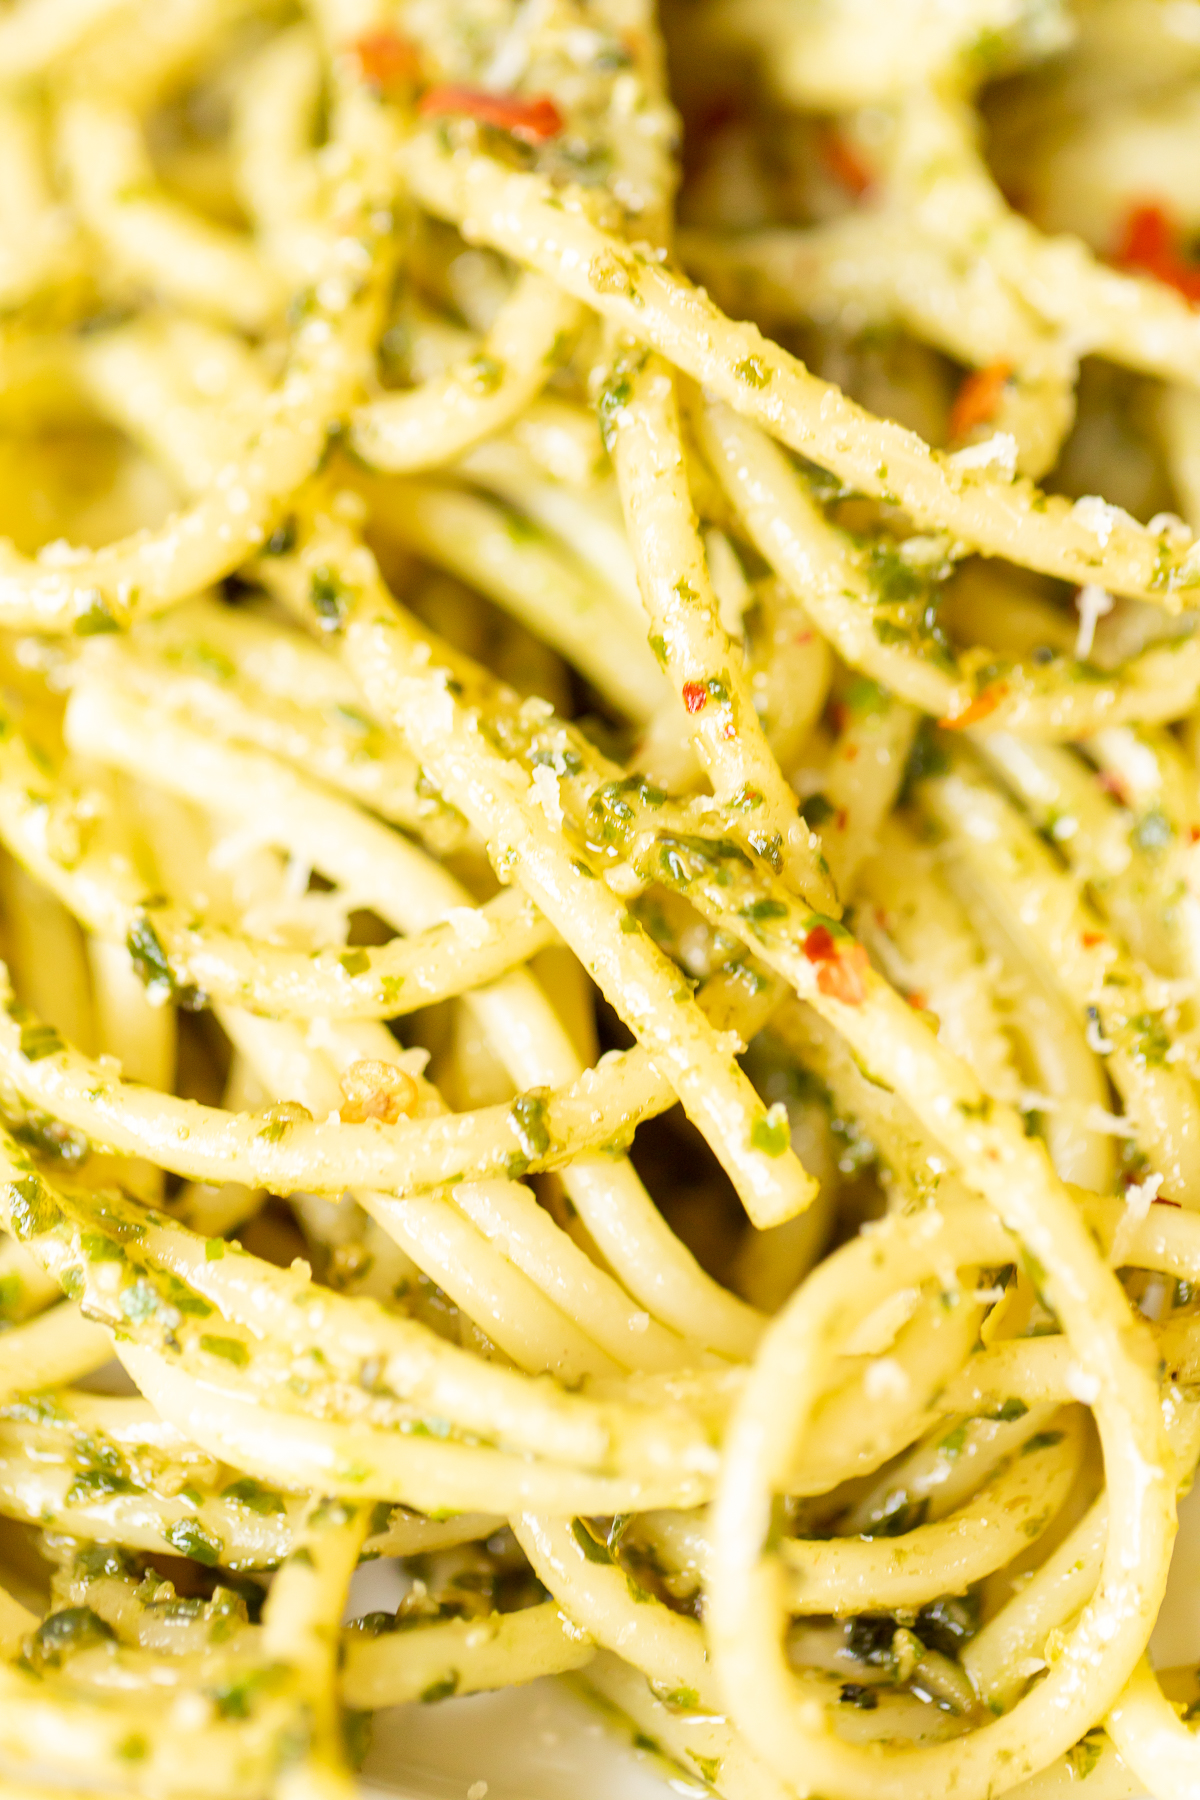 A plate of spaghetti with pesto pasta on it.